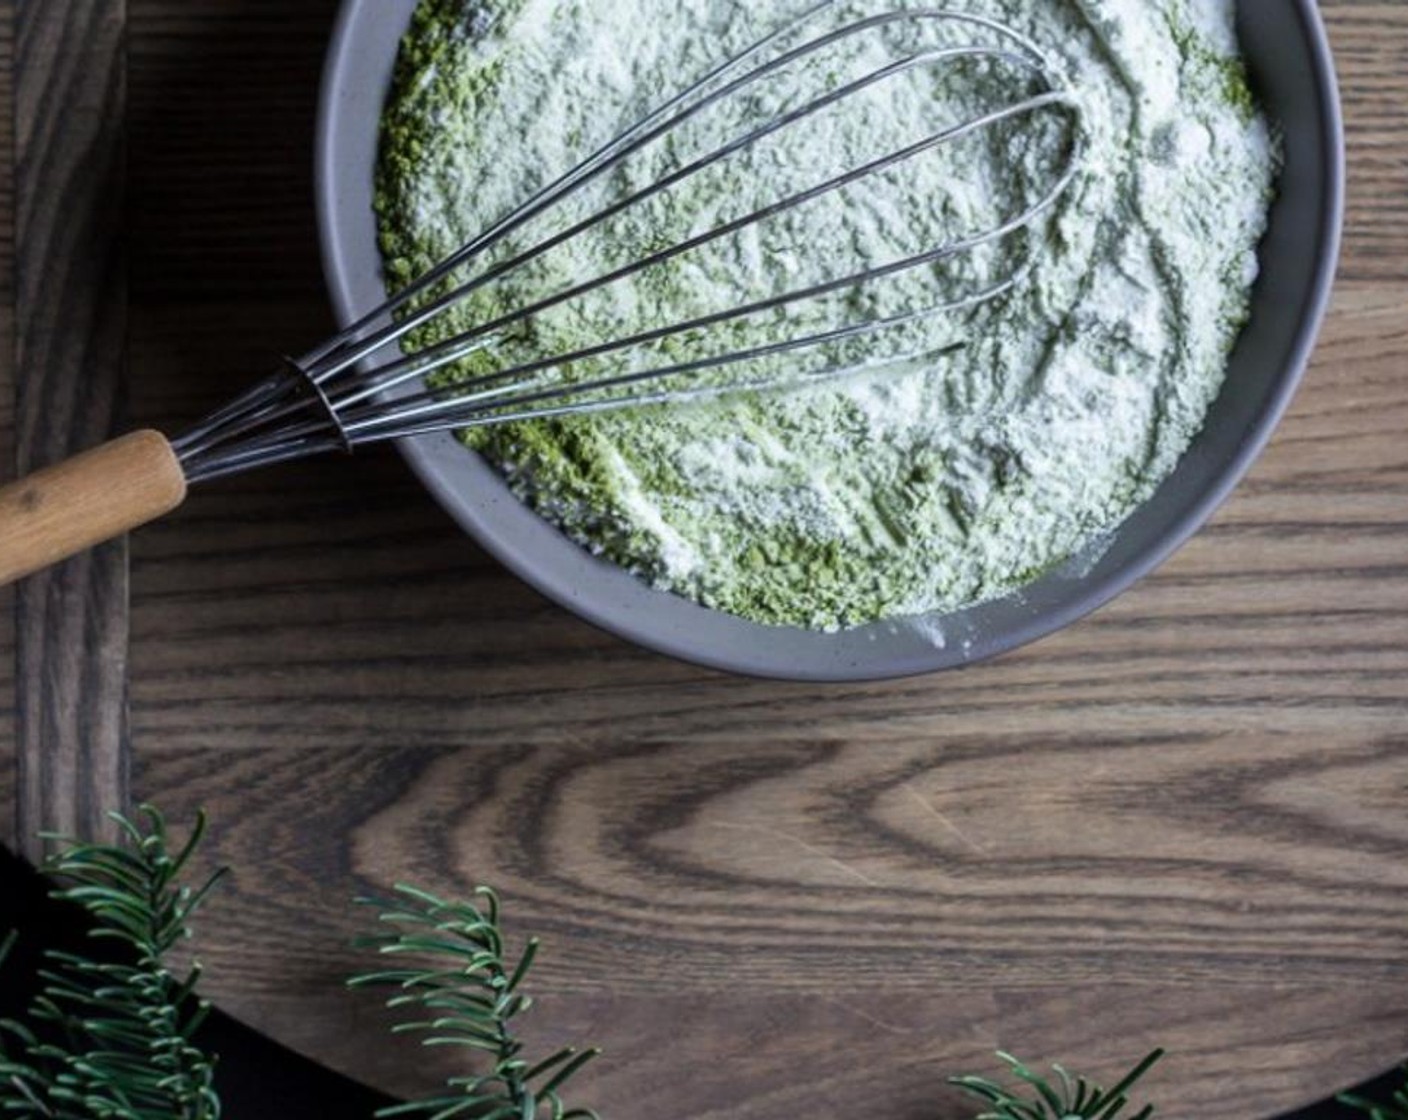 step 2 In a bowl, whisk together Gluten-Free All-Purpose Flour (1 2/3 cups), Matcha Powder (2 Tbsp), and Salt (3/4 tsp) until well incorporated. Sift flour mixture over the creamed butter mixture and mix until all flour is combined with the butter and the dough has come together.